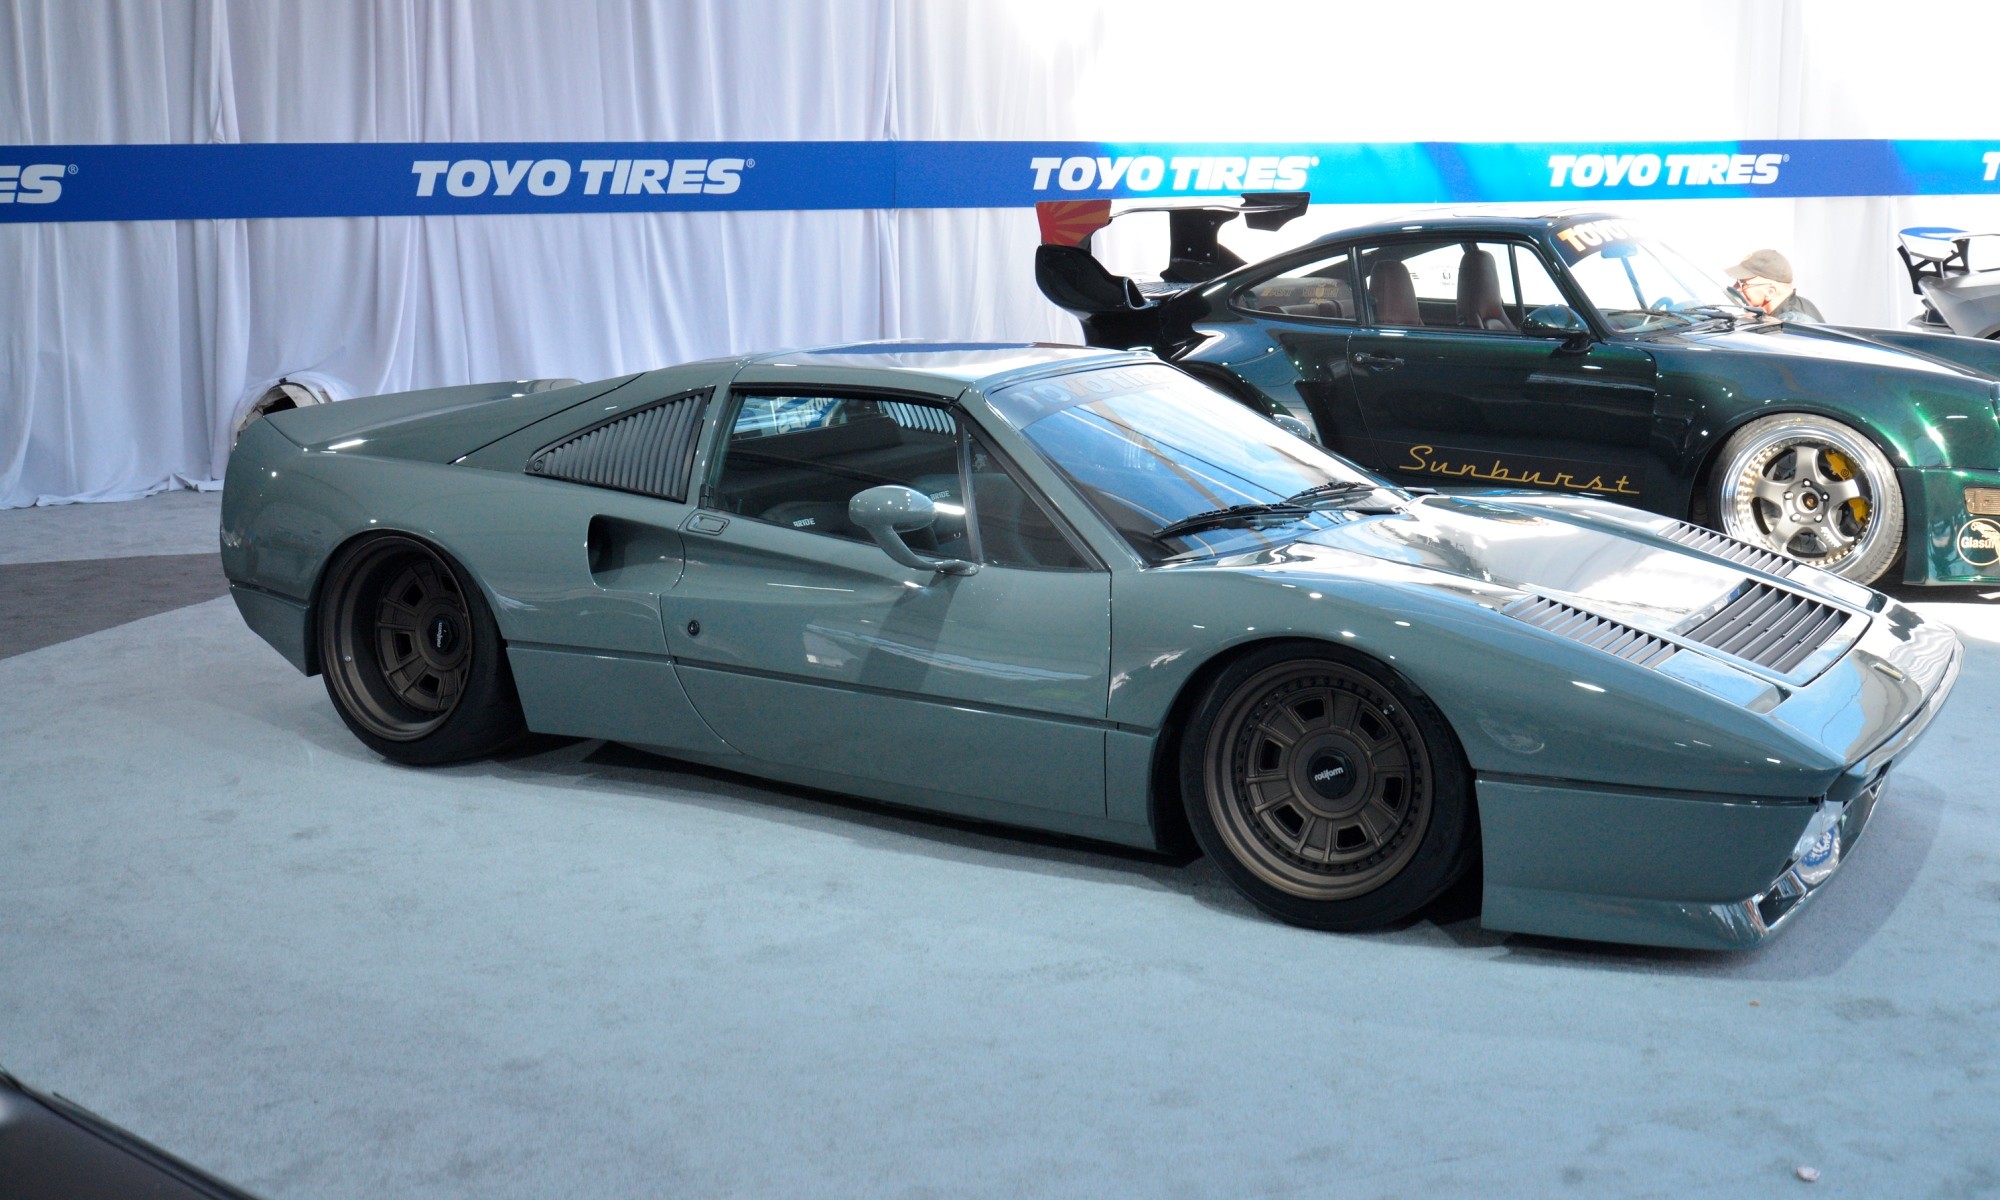 This resto-modded Ferrari was a real hit